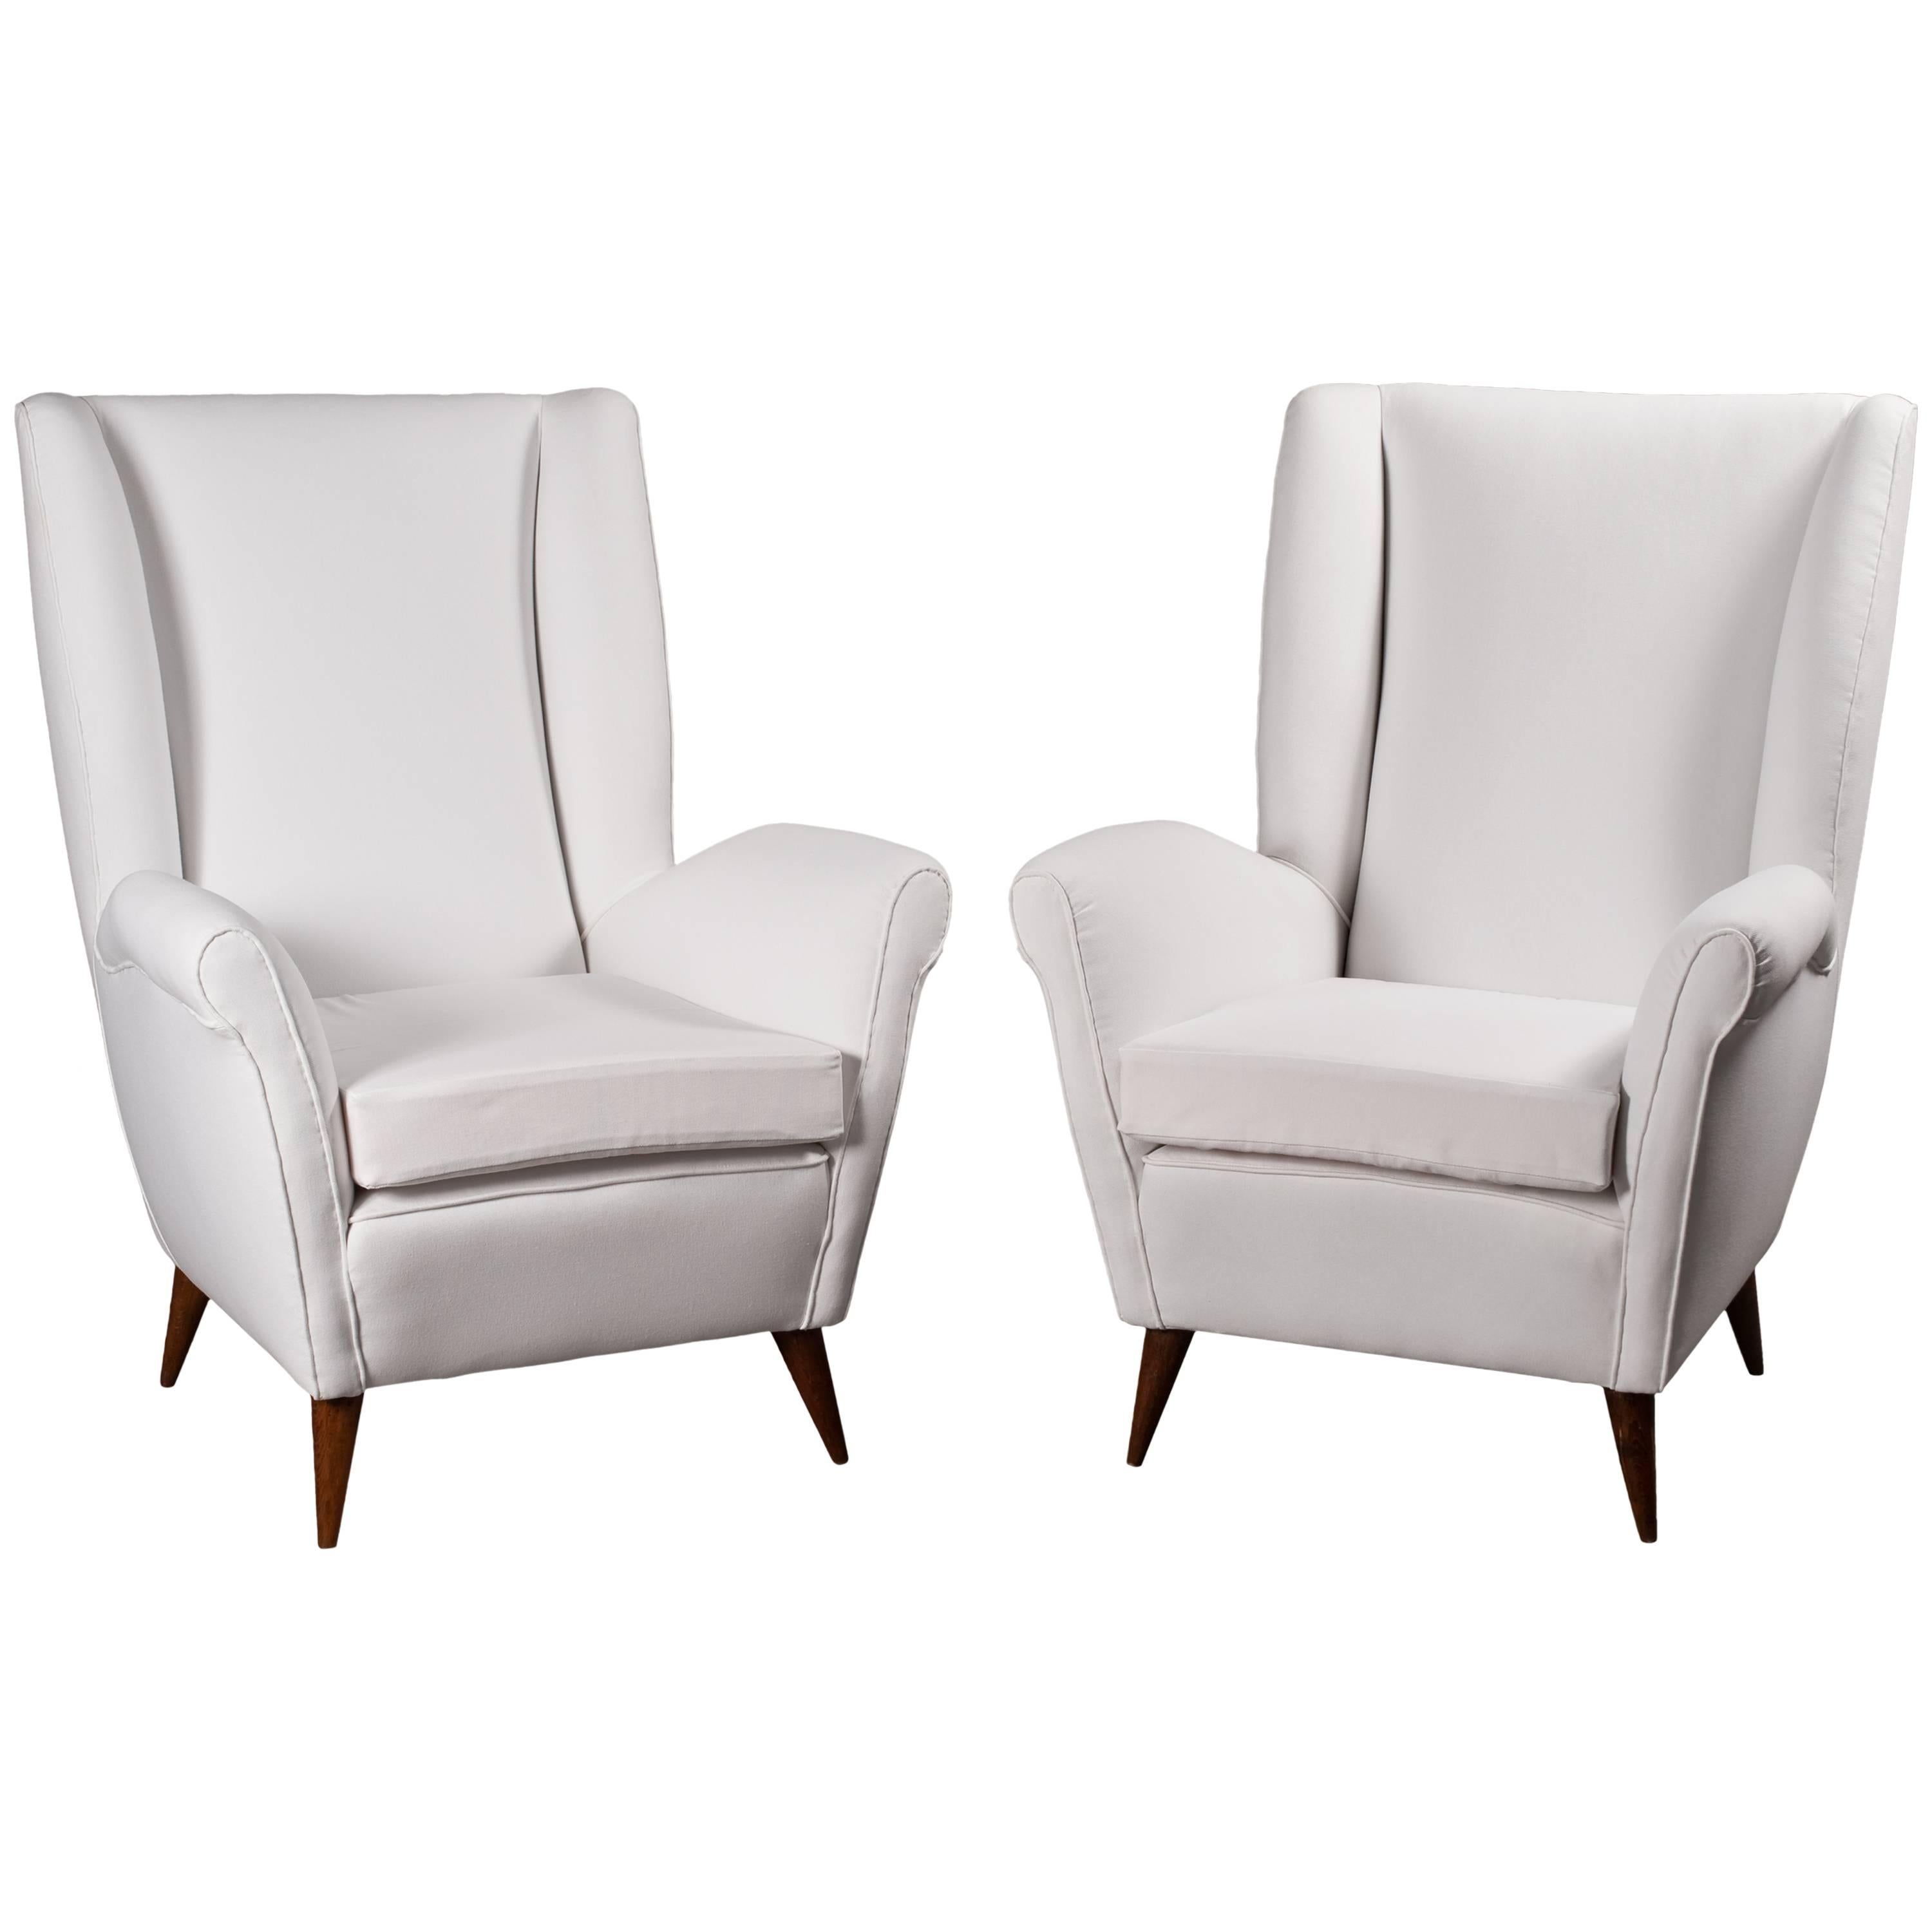 Charming Pair of Armchairs by Gio Ponti, Archives Expertised